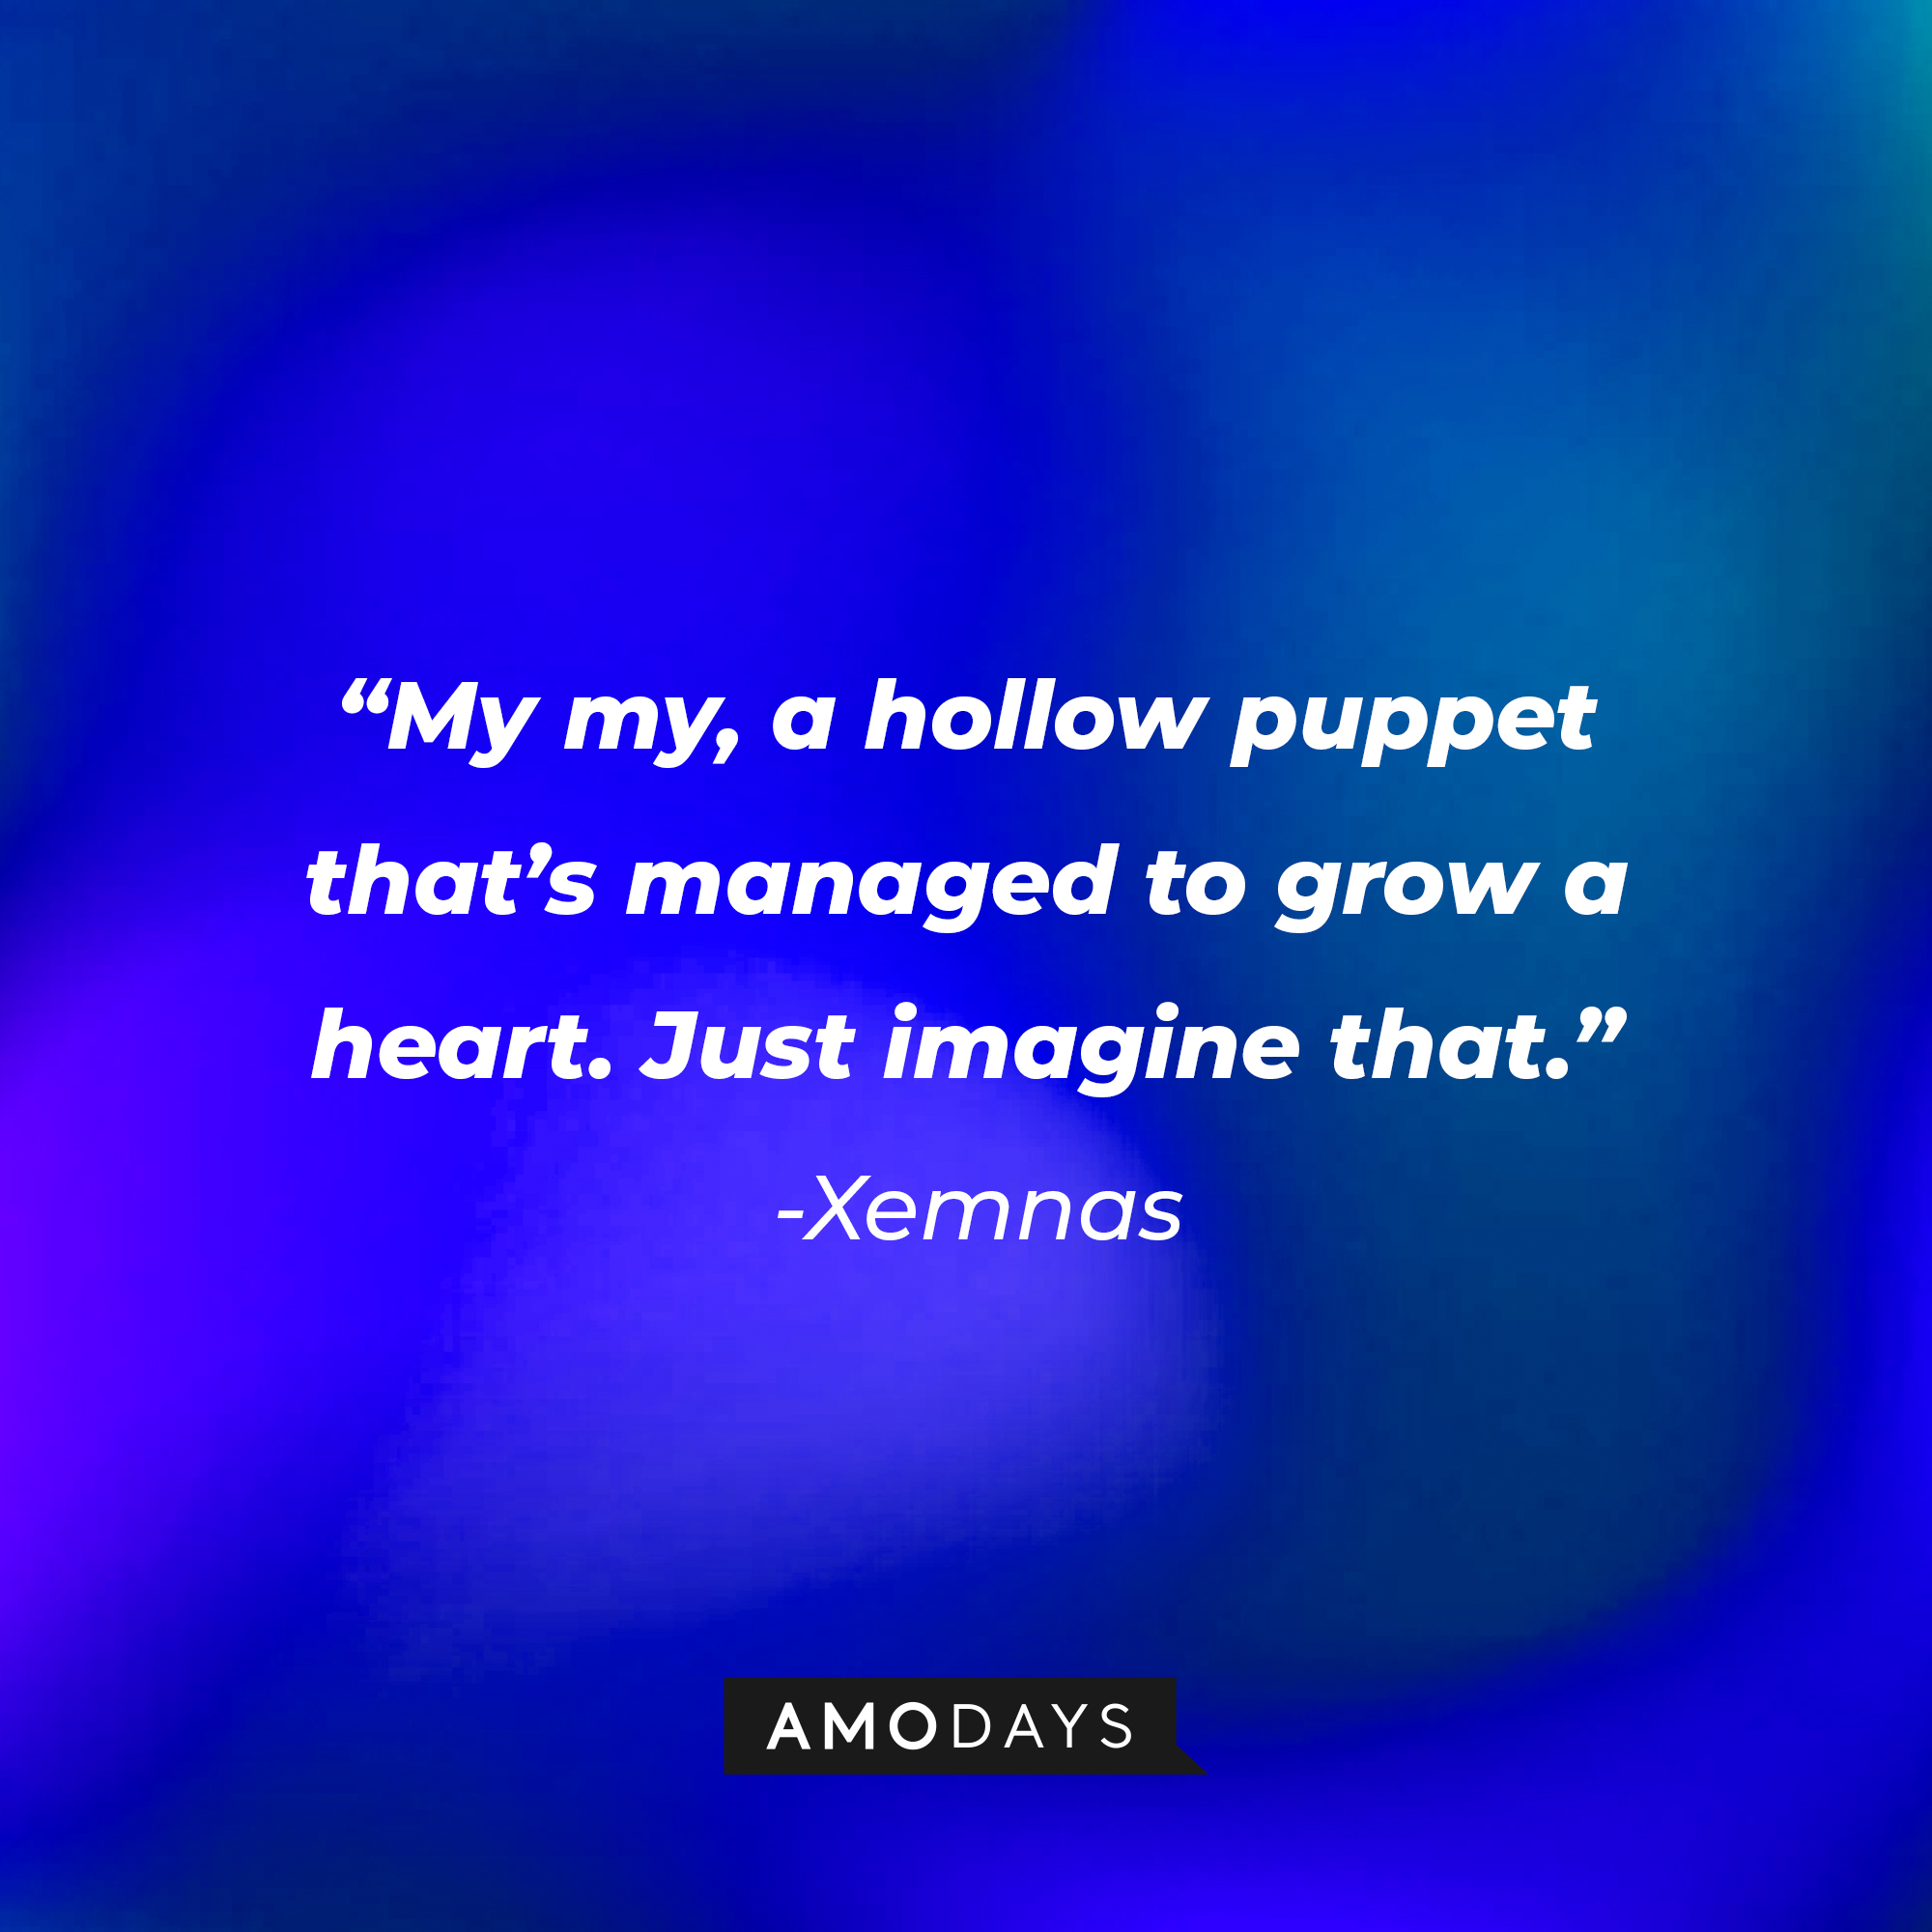 Xenmas’ quote: “My my, a hollow puppet that’s managed to grow a heart. Just imagine that.” | Source: AmoDays